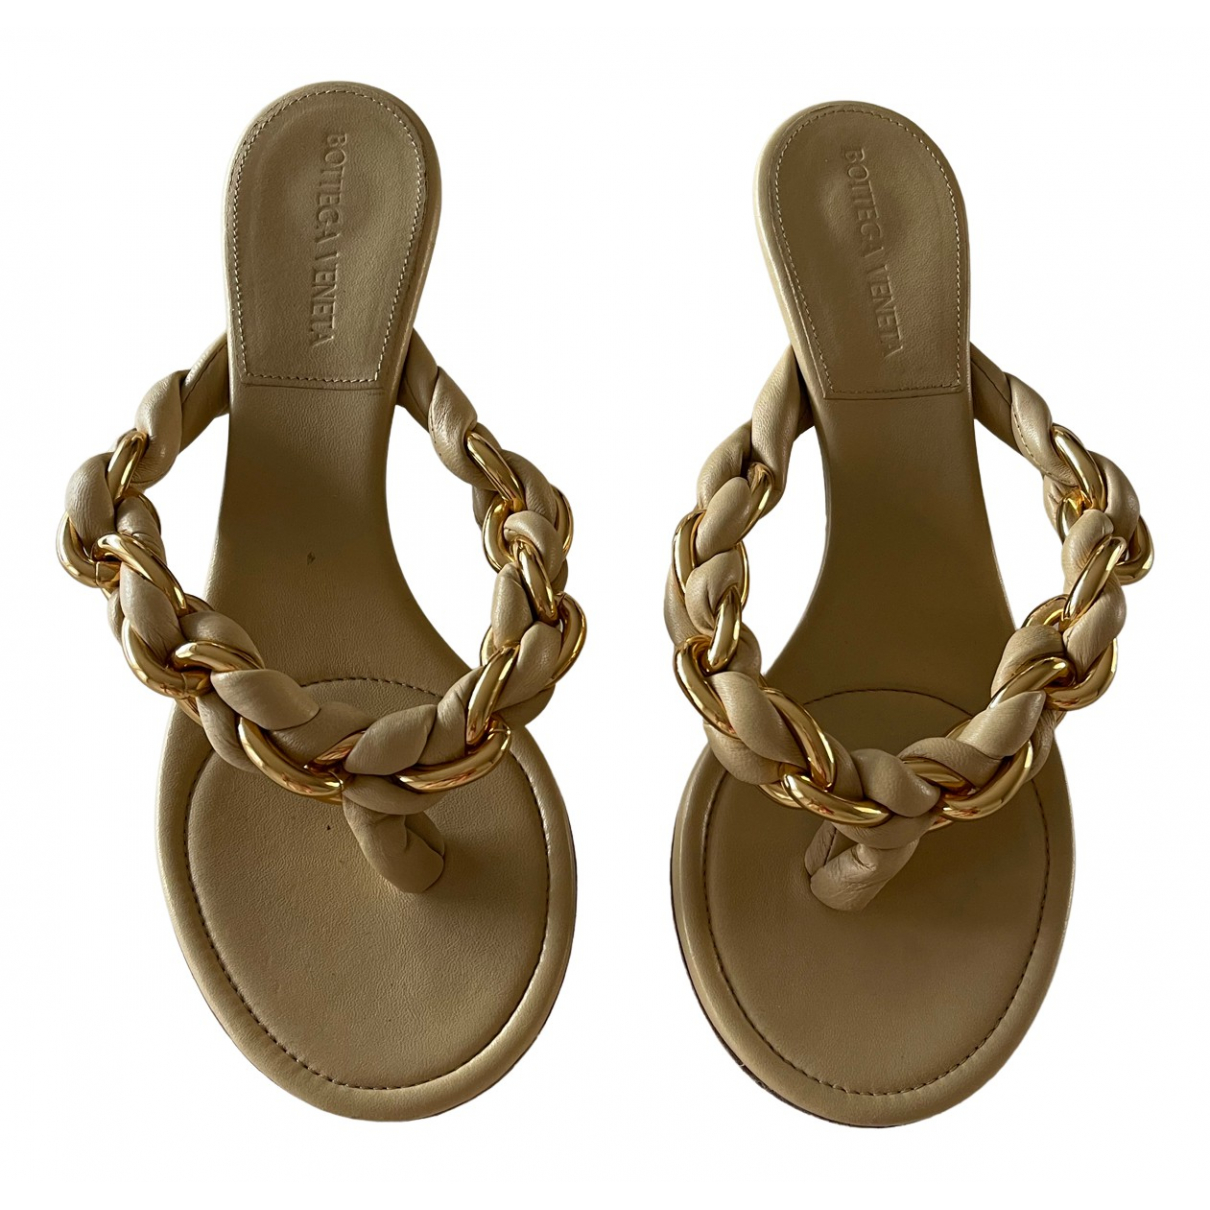 Max 76% OFF wholesale Leather sandal